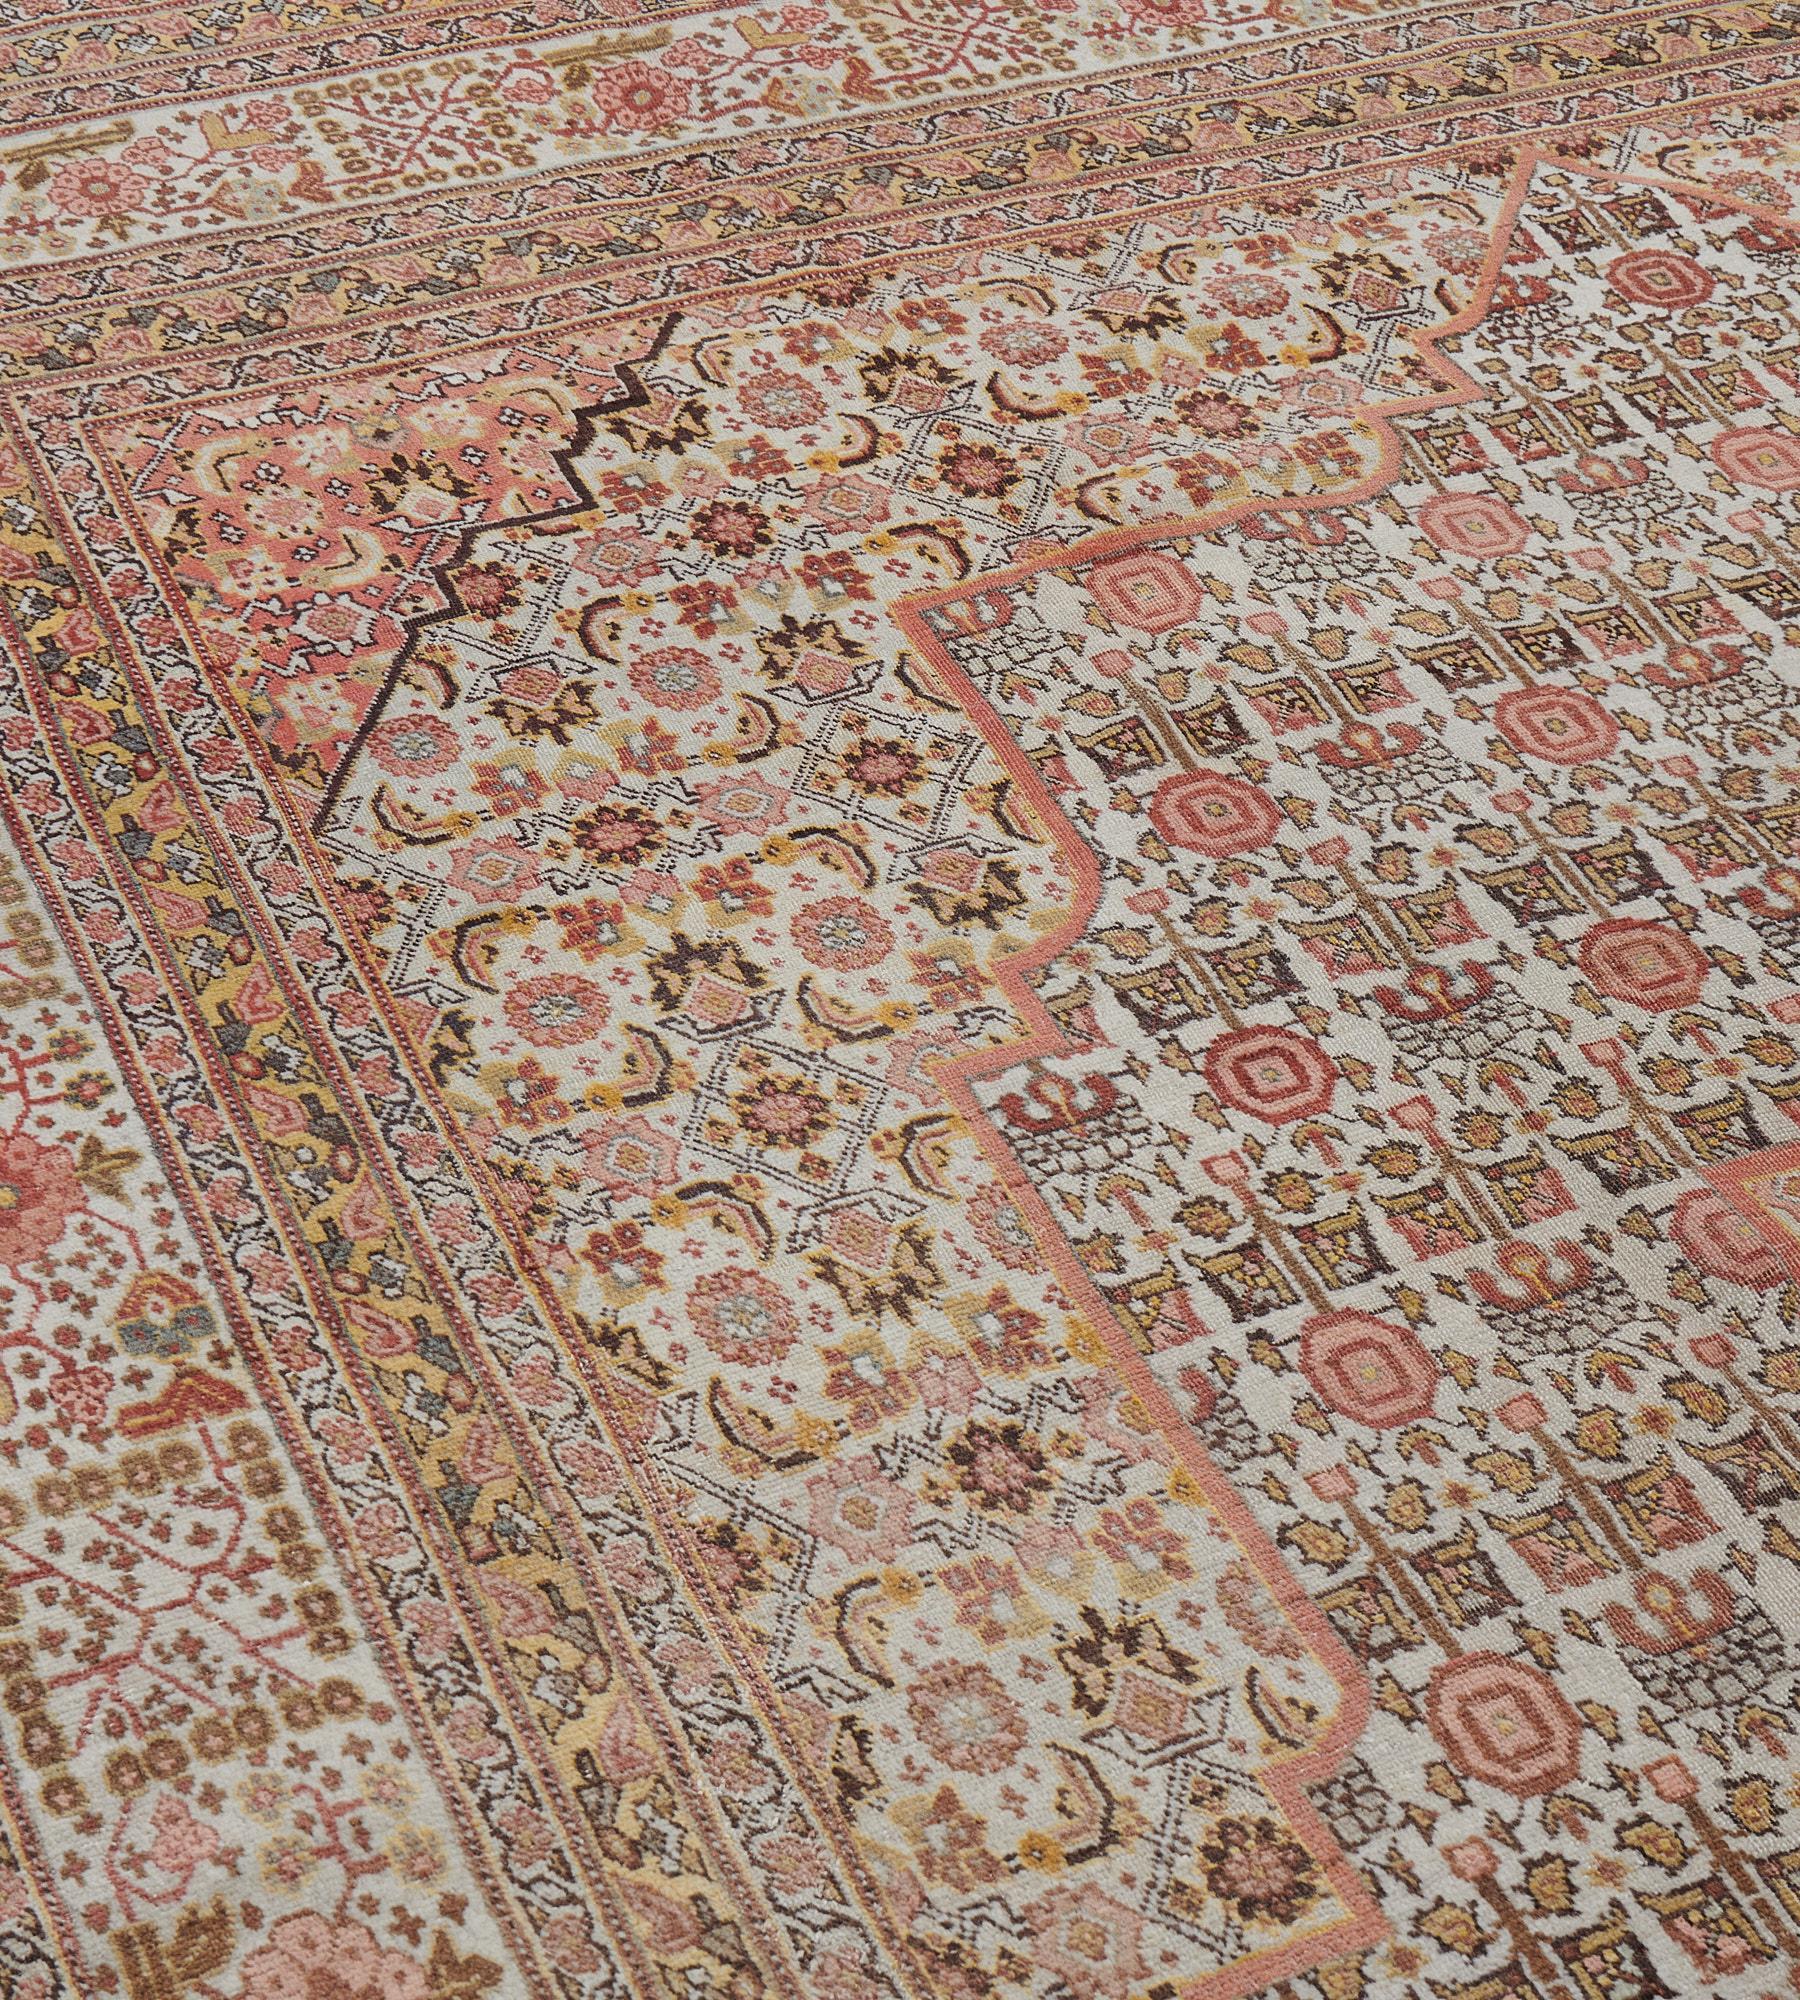 Late 19th Century Traditional Wool Handwoven Persian Tabriz Rug In Good Condition For Sale In West Hollywood, CA